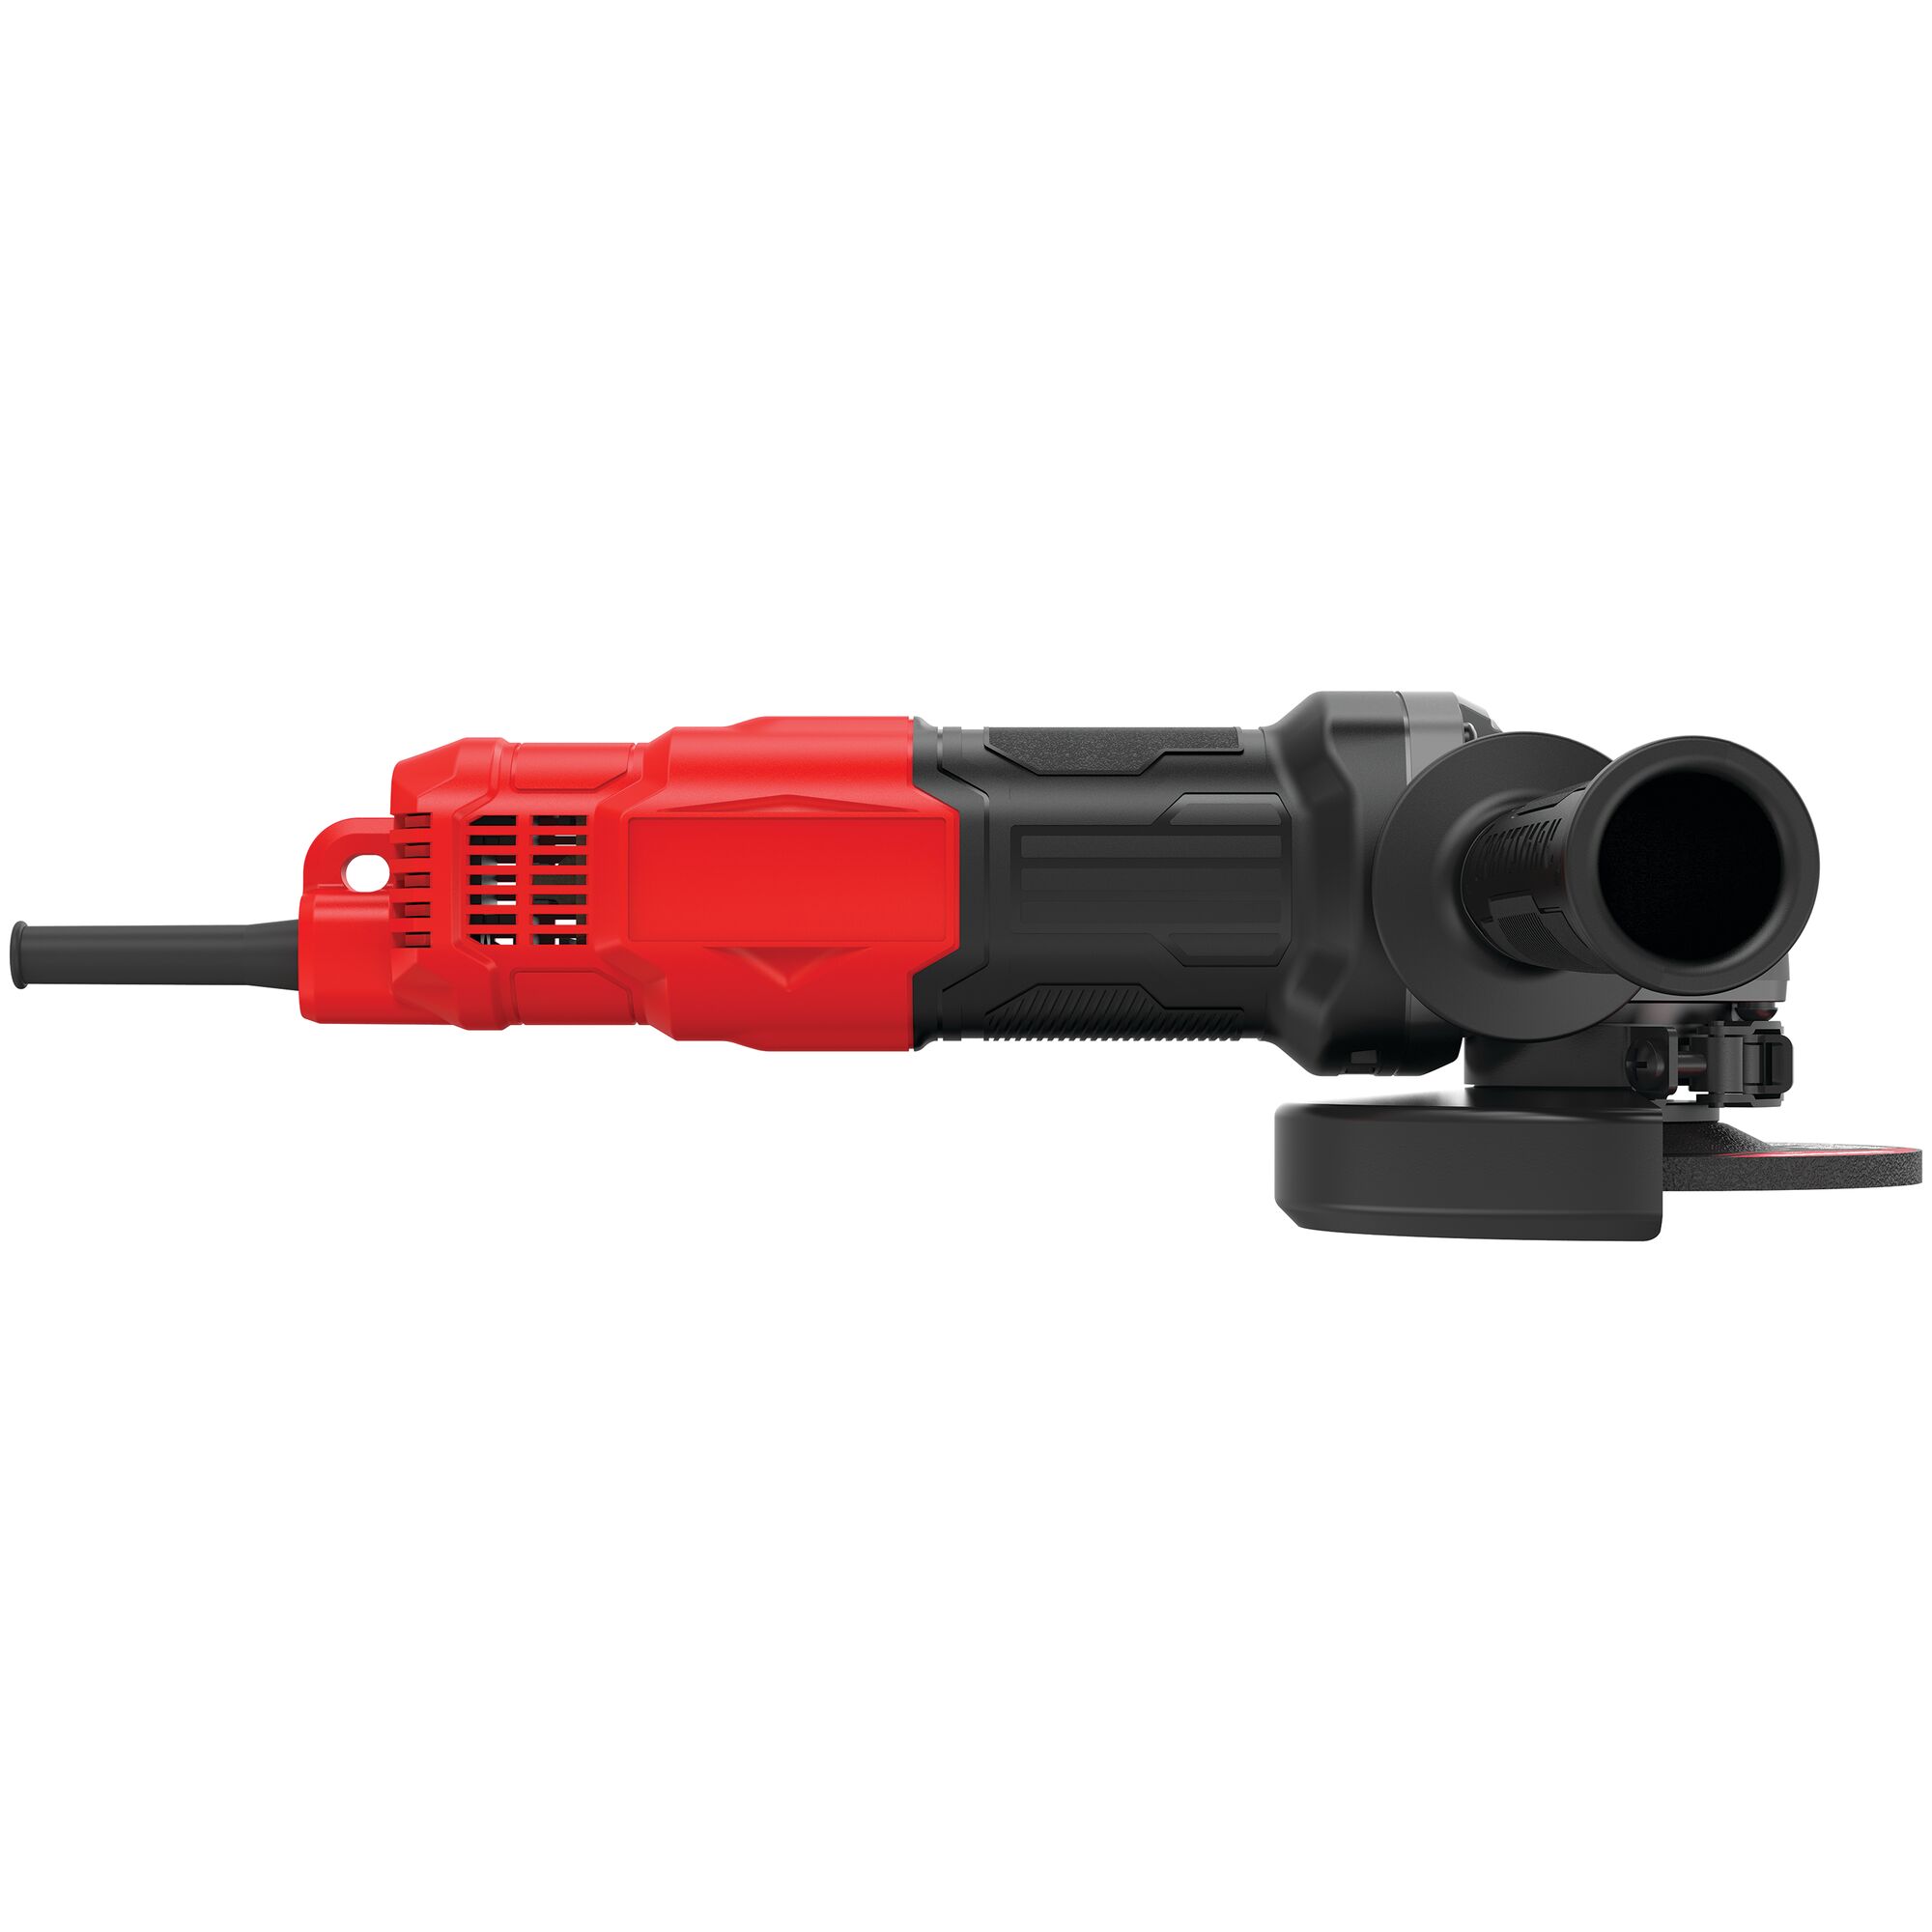 View of CRAFTSMAN Angle Grinder on white background